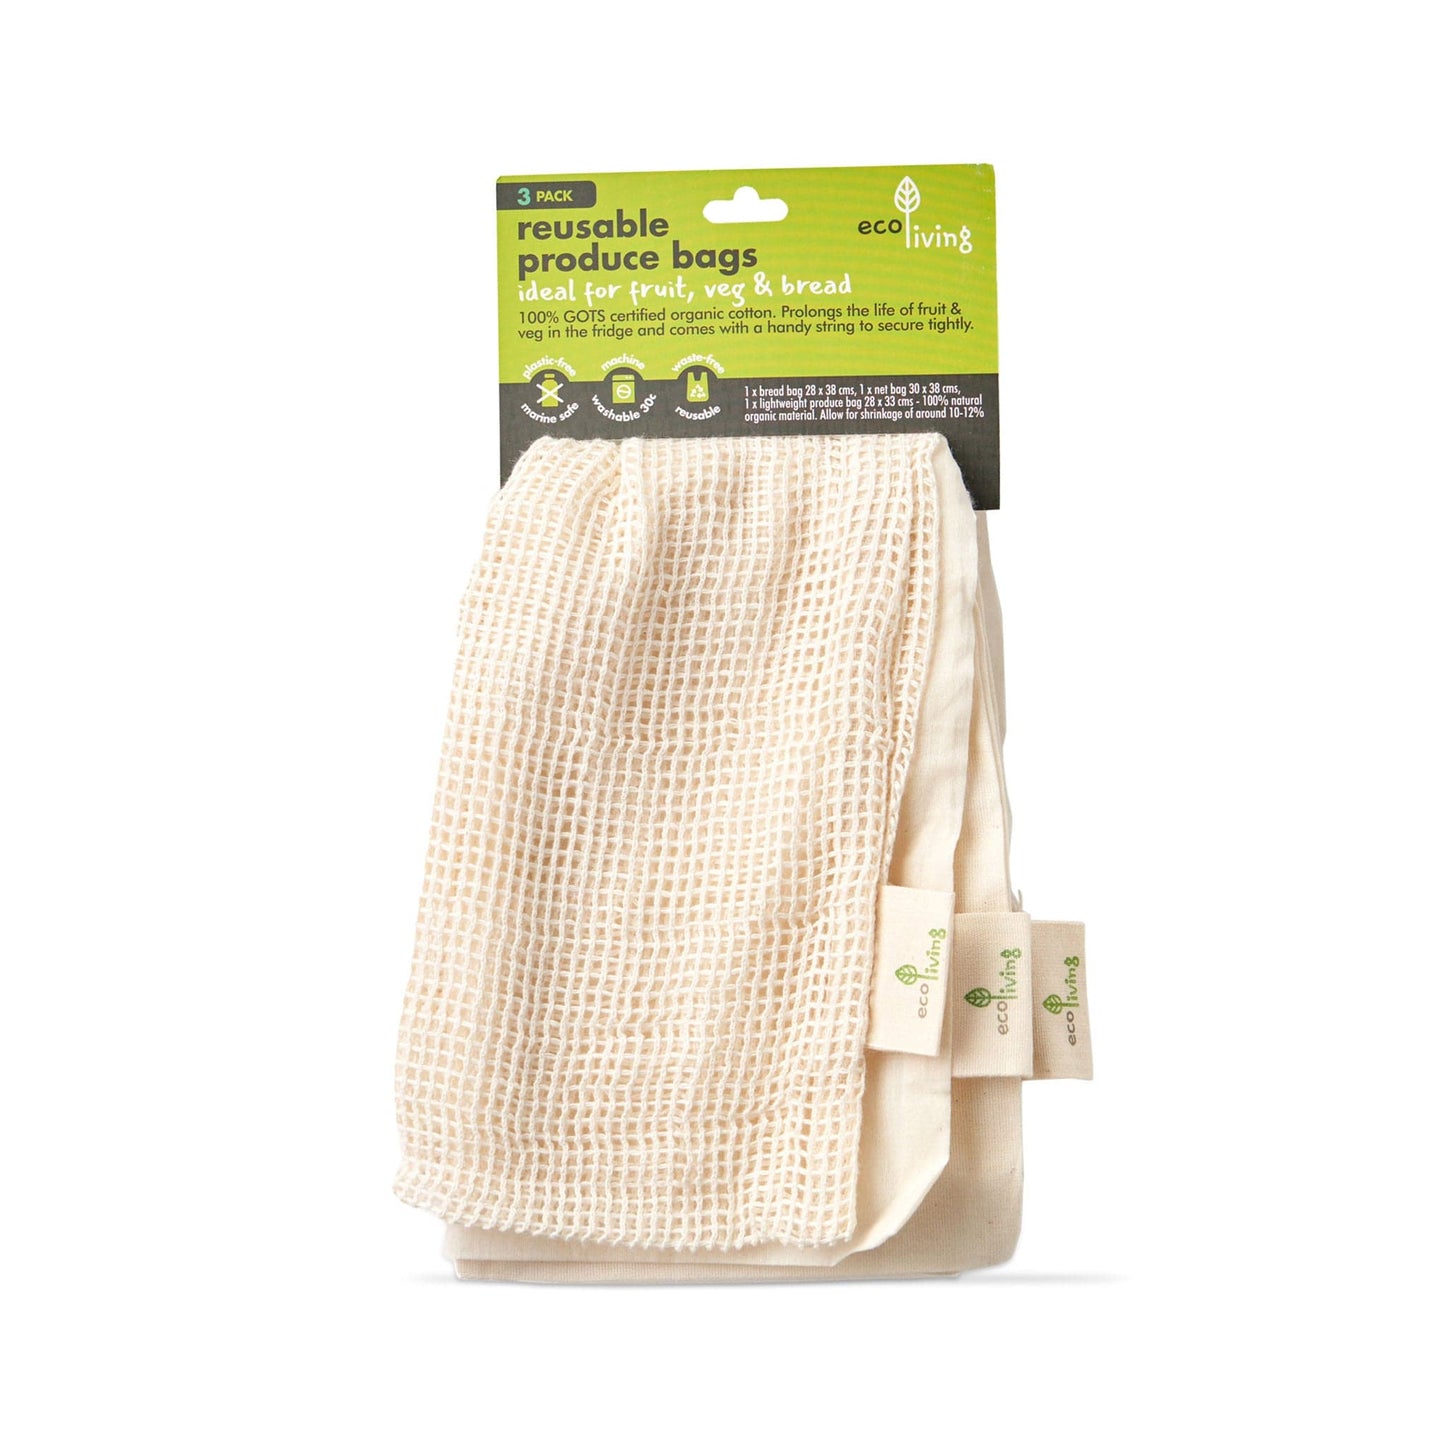 ecoLiving Produce Bags Reusable Organic Produce Bags and Bread Bag - 3pk